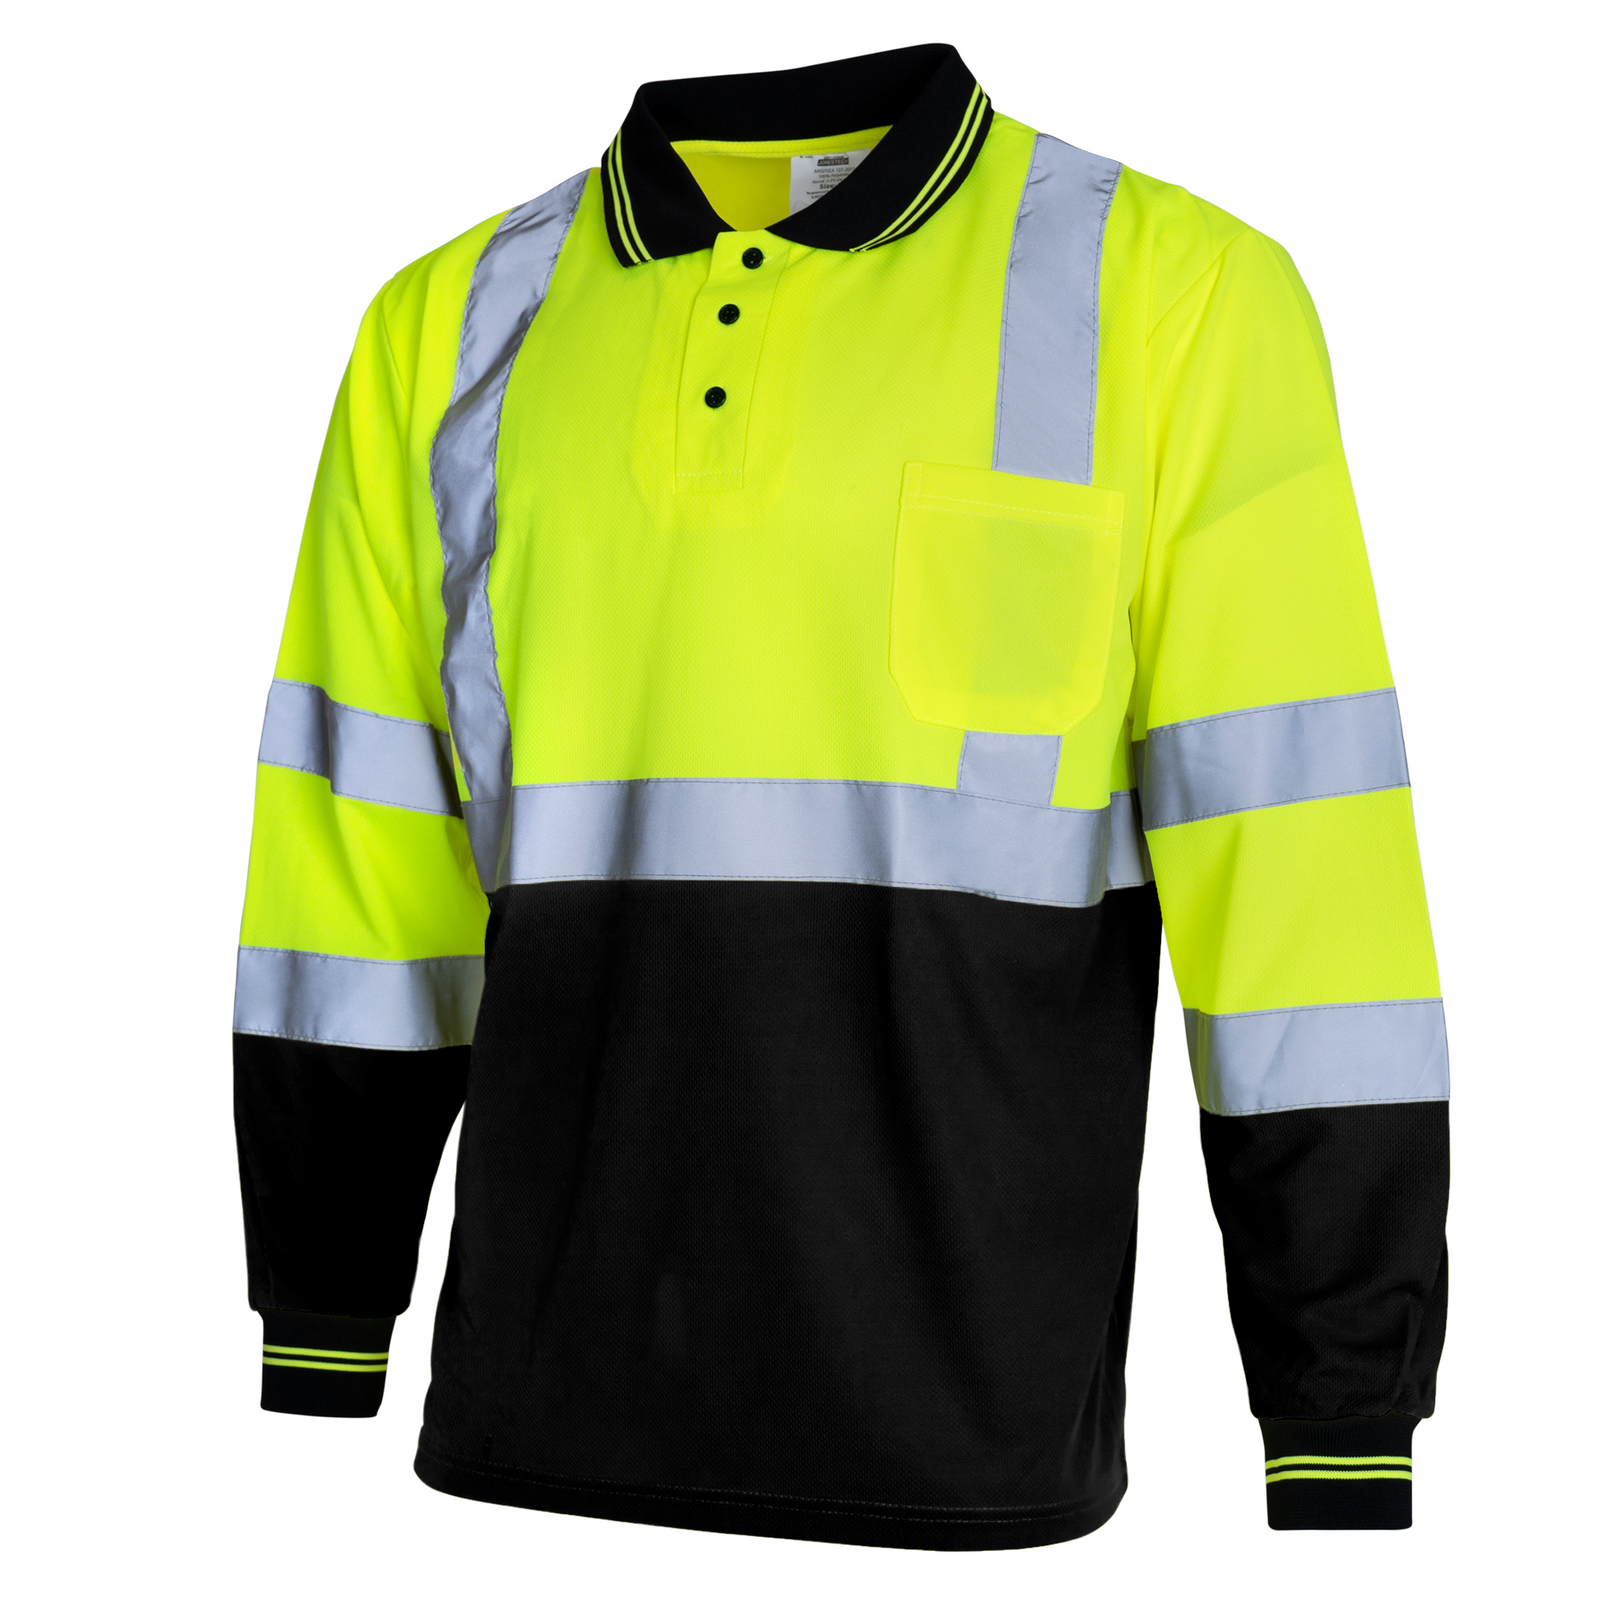 Black and yellow Hi Vis reflective safety long sleeve ANSI compliant polo shirt